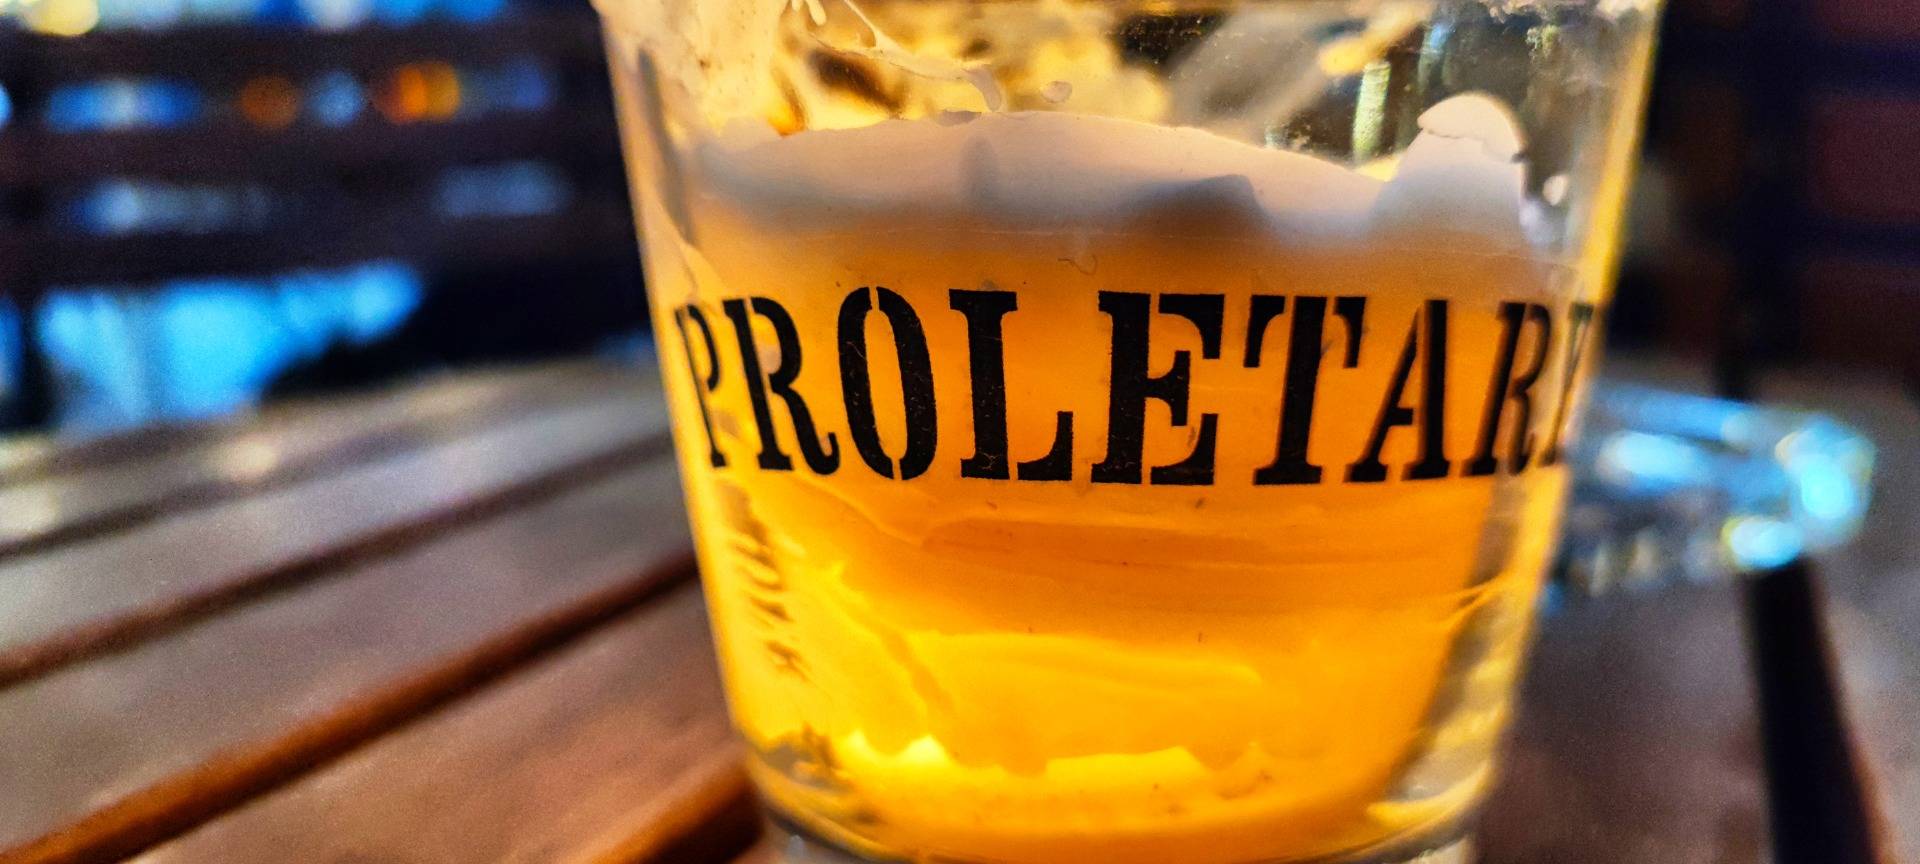 Remember the socialist time: Proletariat beer